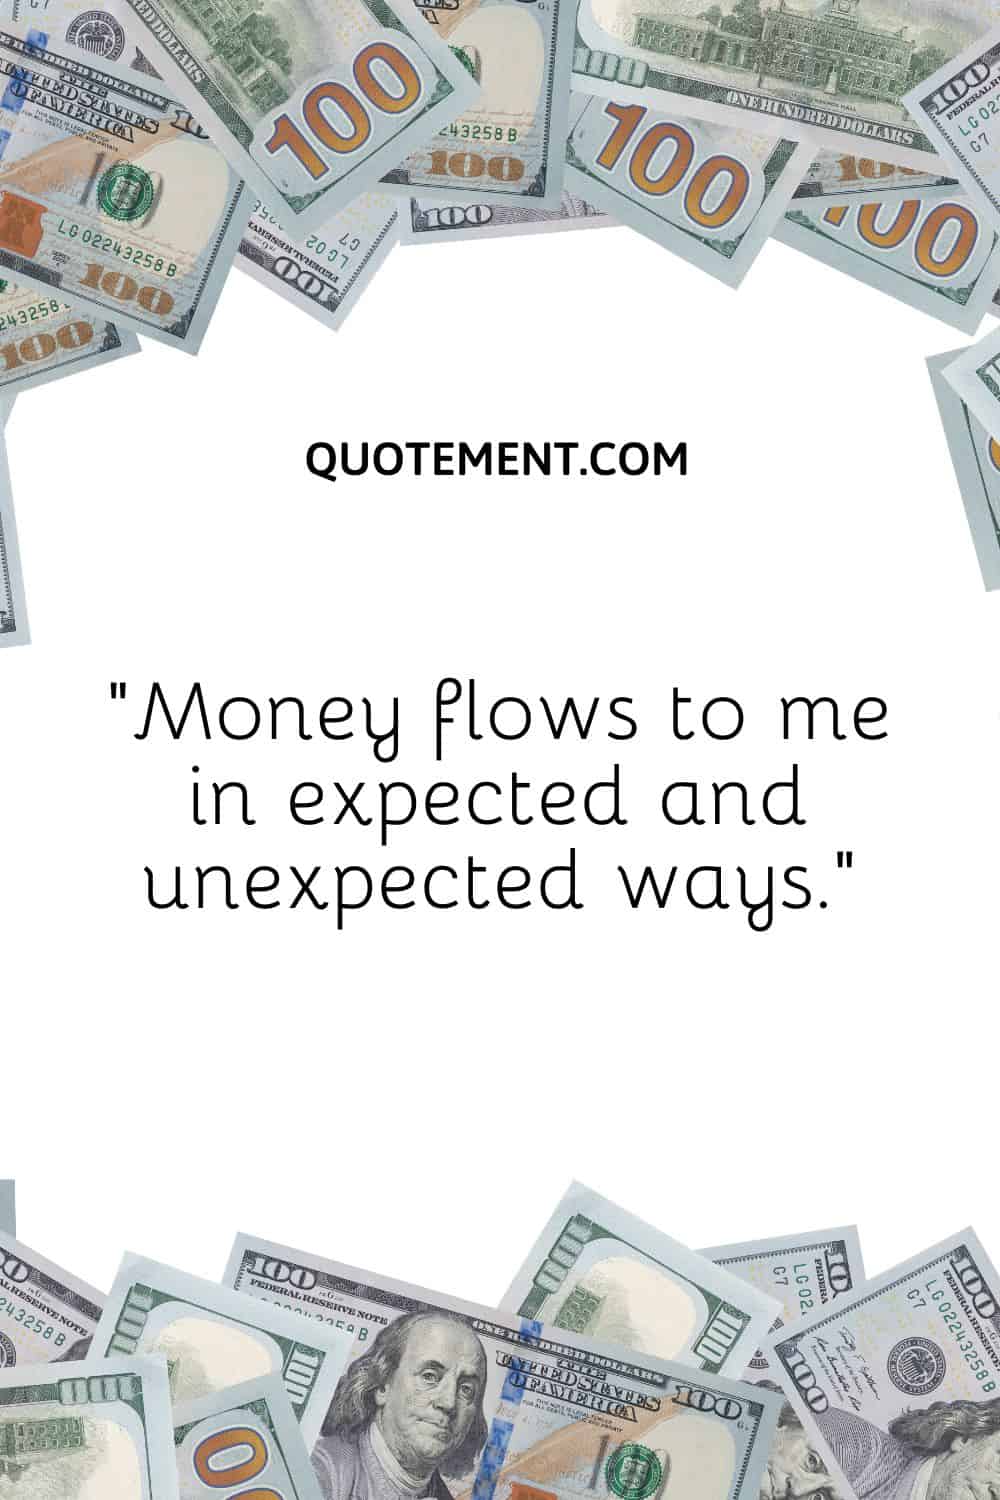 “Money flows to me in expected and unexpected ways.”